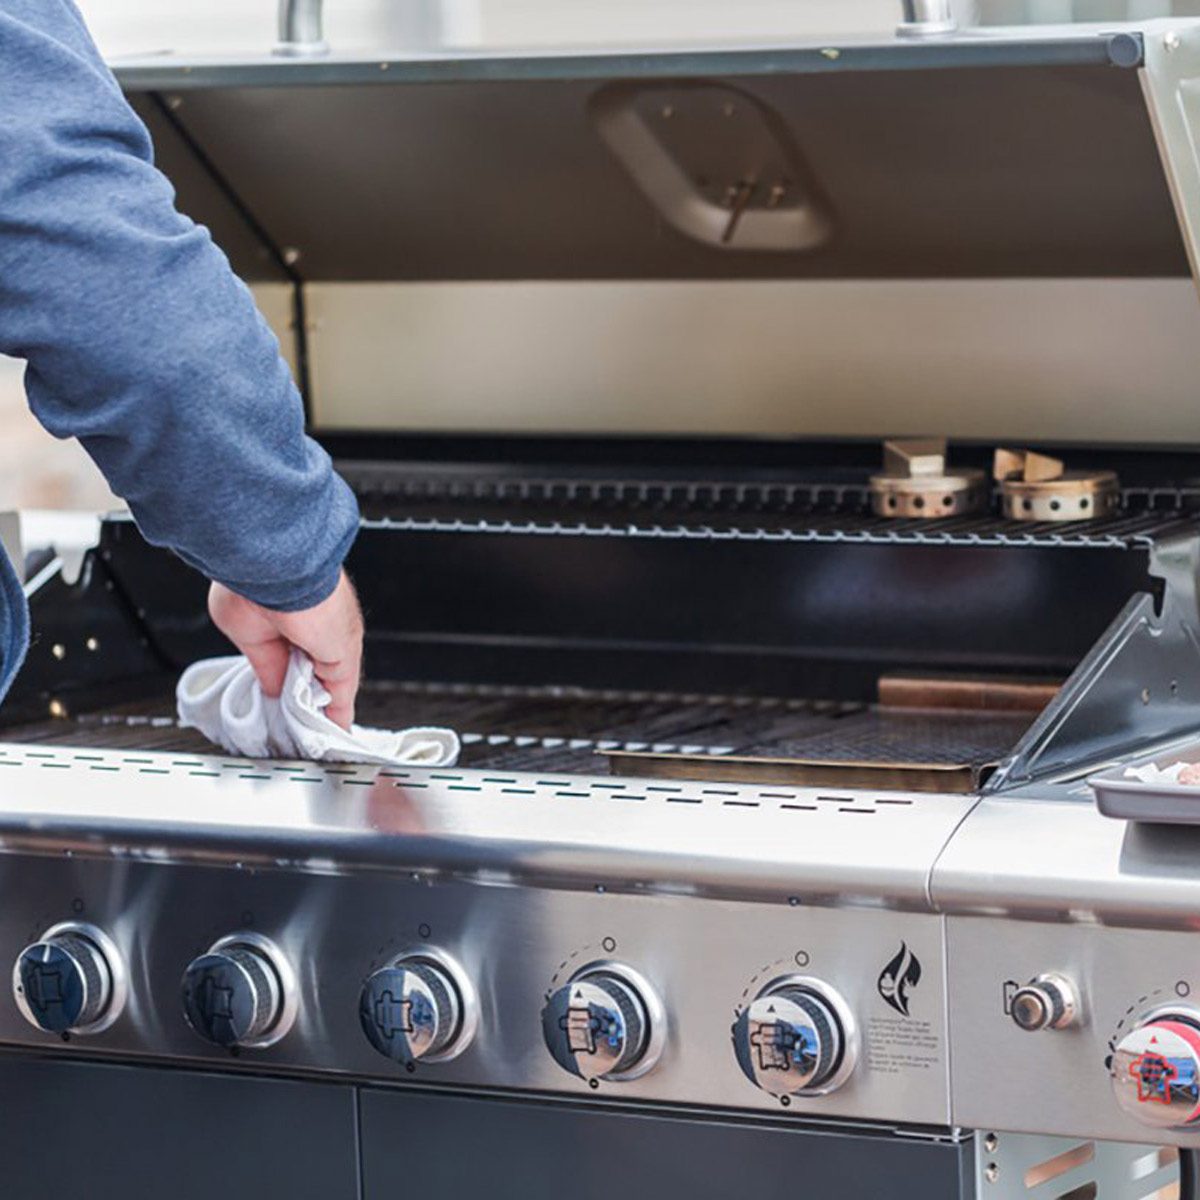 Charcoal vs Gas Grilling: Pros and Cons